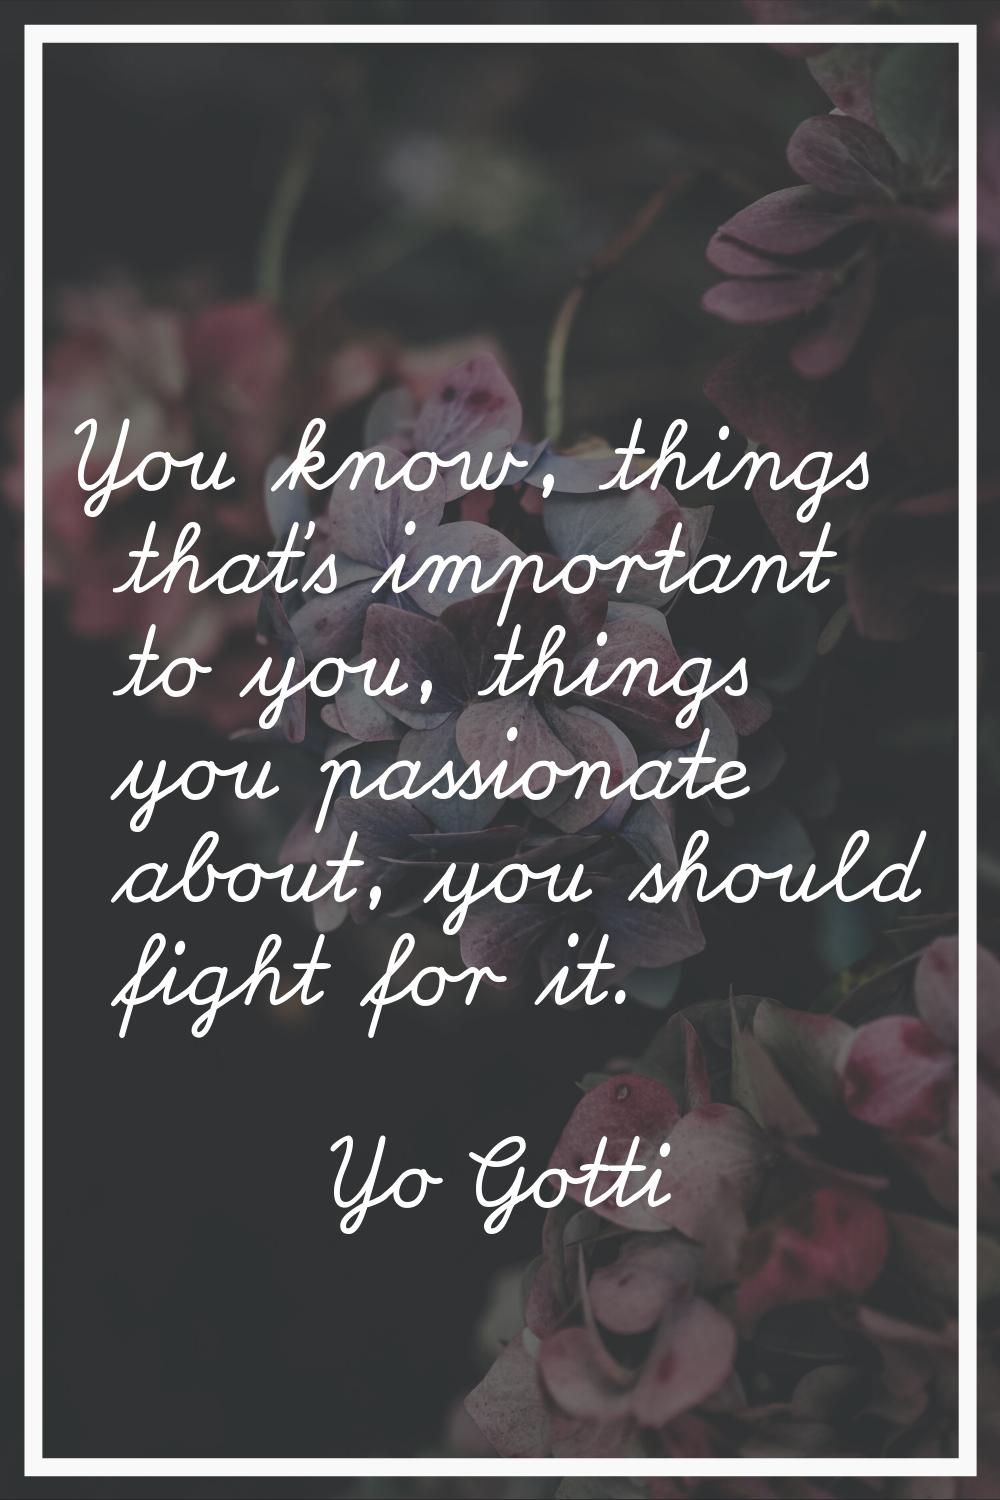 You know, things that's important to you, things you passionate about, you should fight for it.